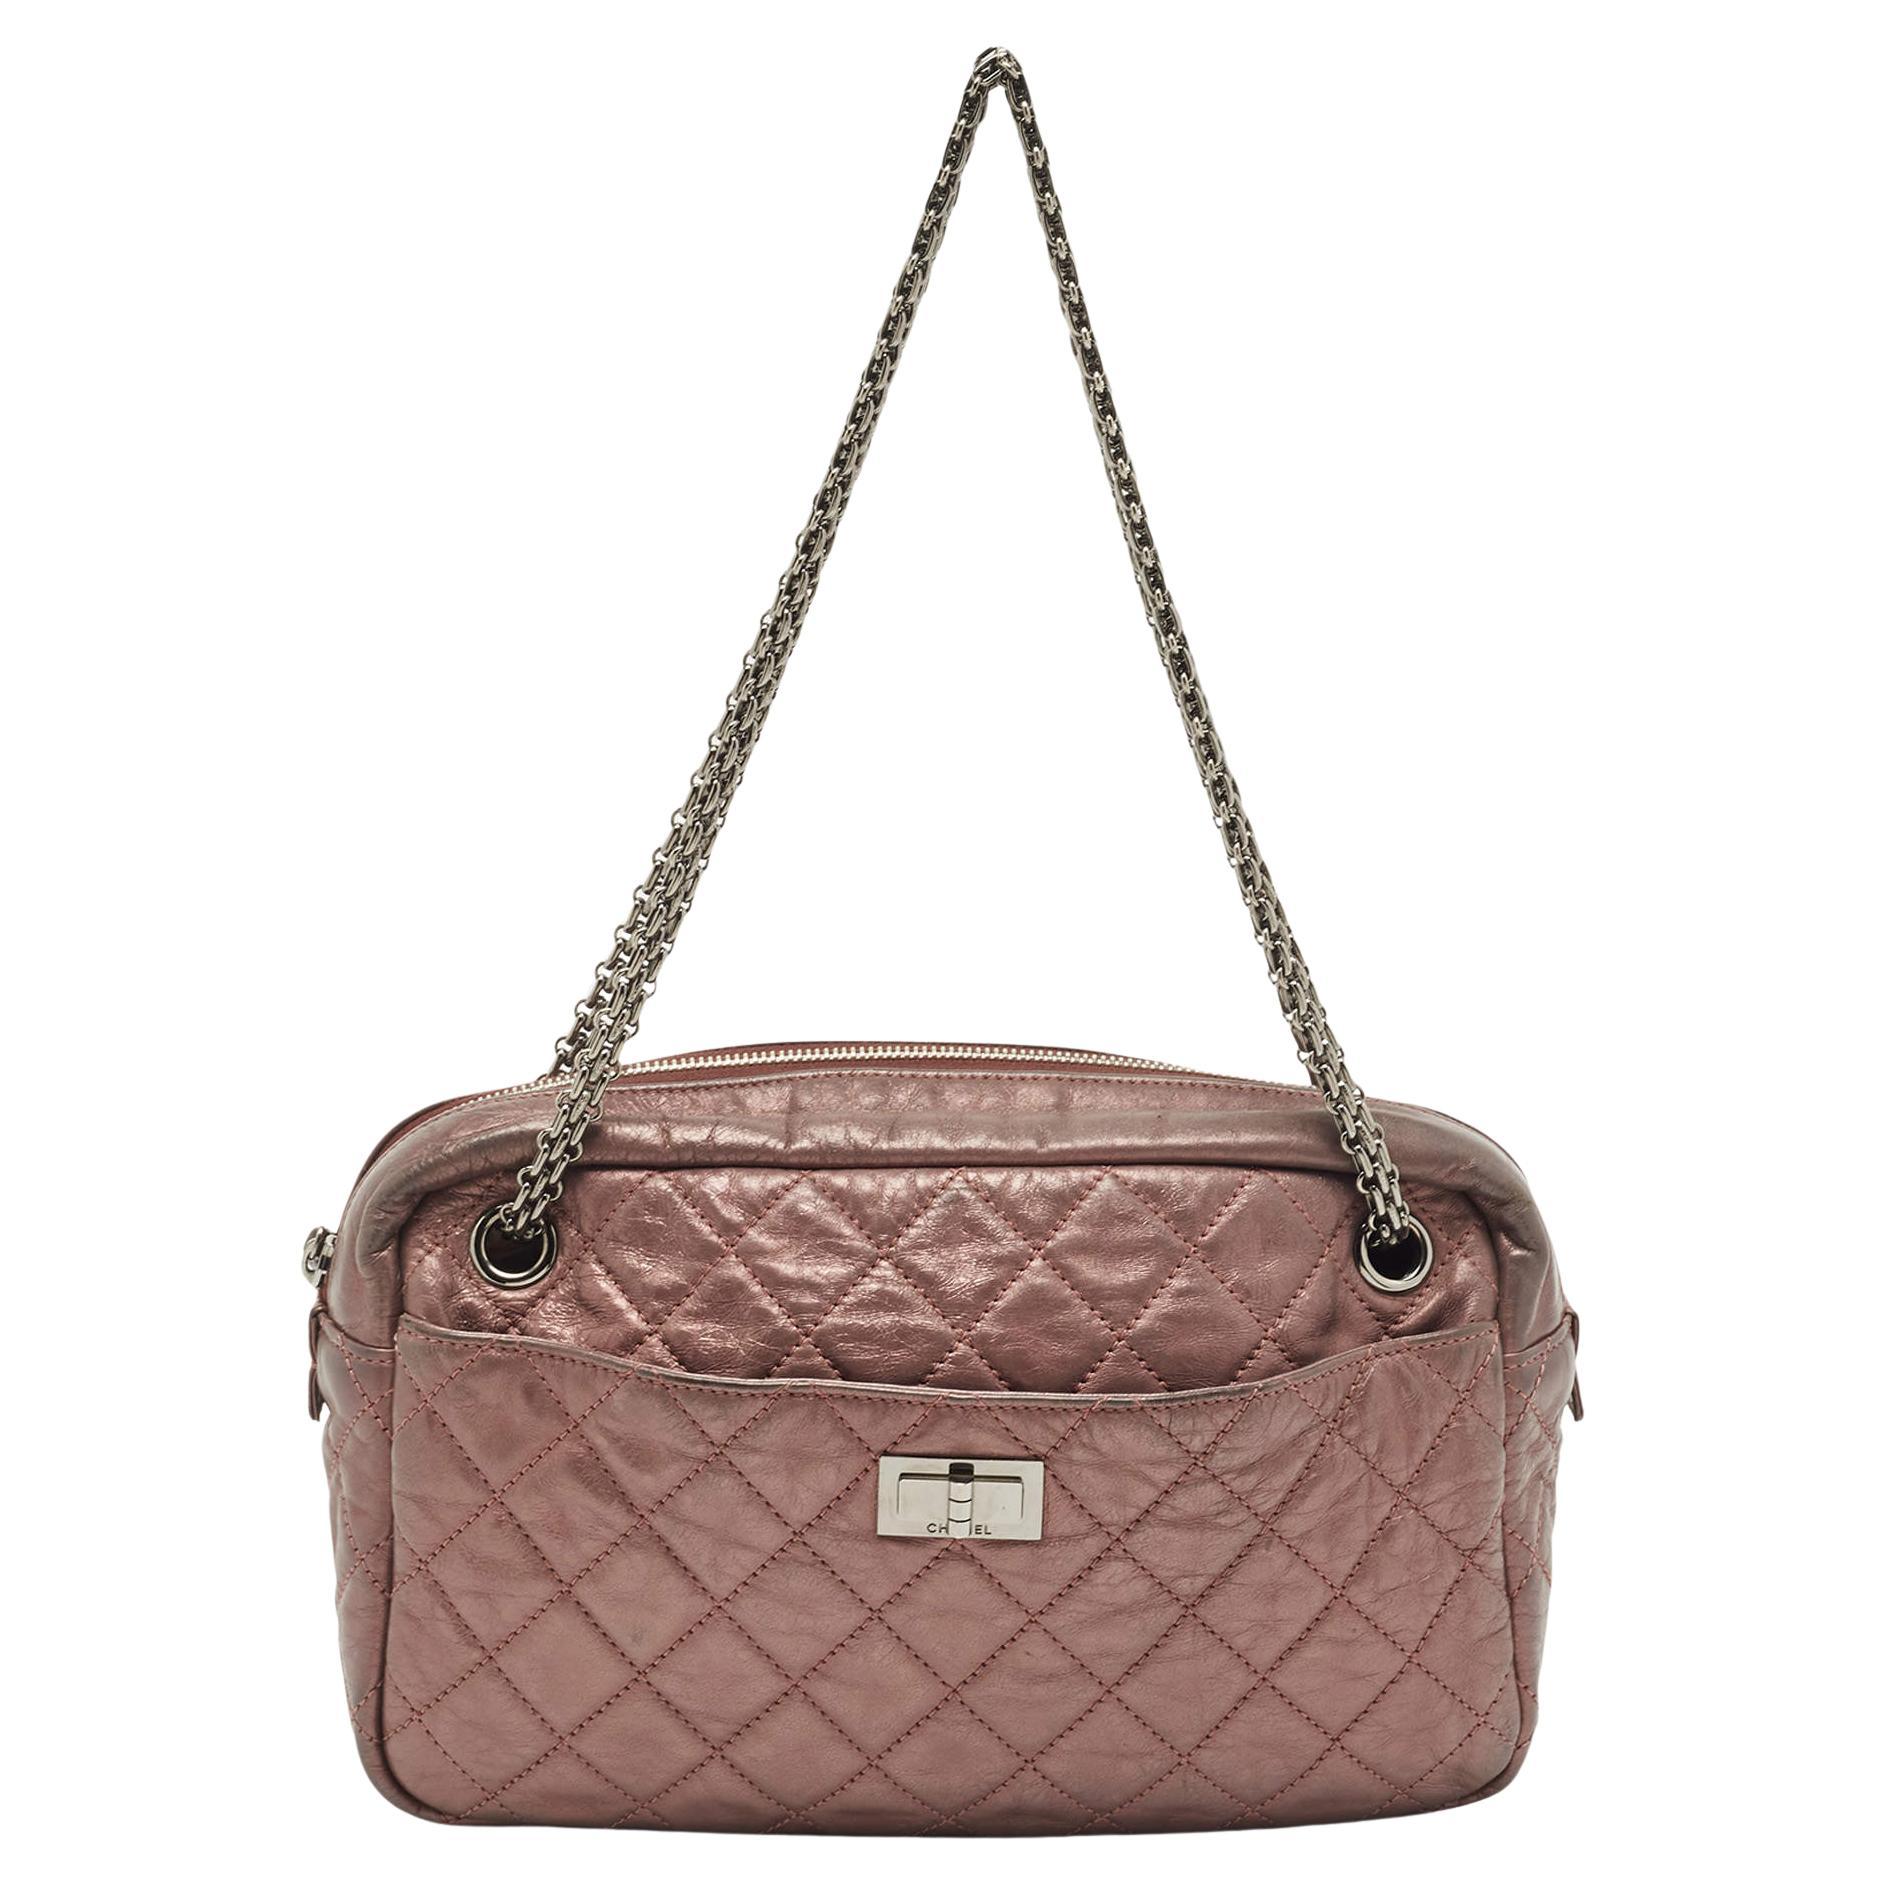 Chanel Metallic Old Rose Crinkled Quilted Leather Reissue Camera Bag For Sale